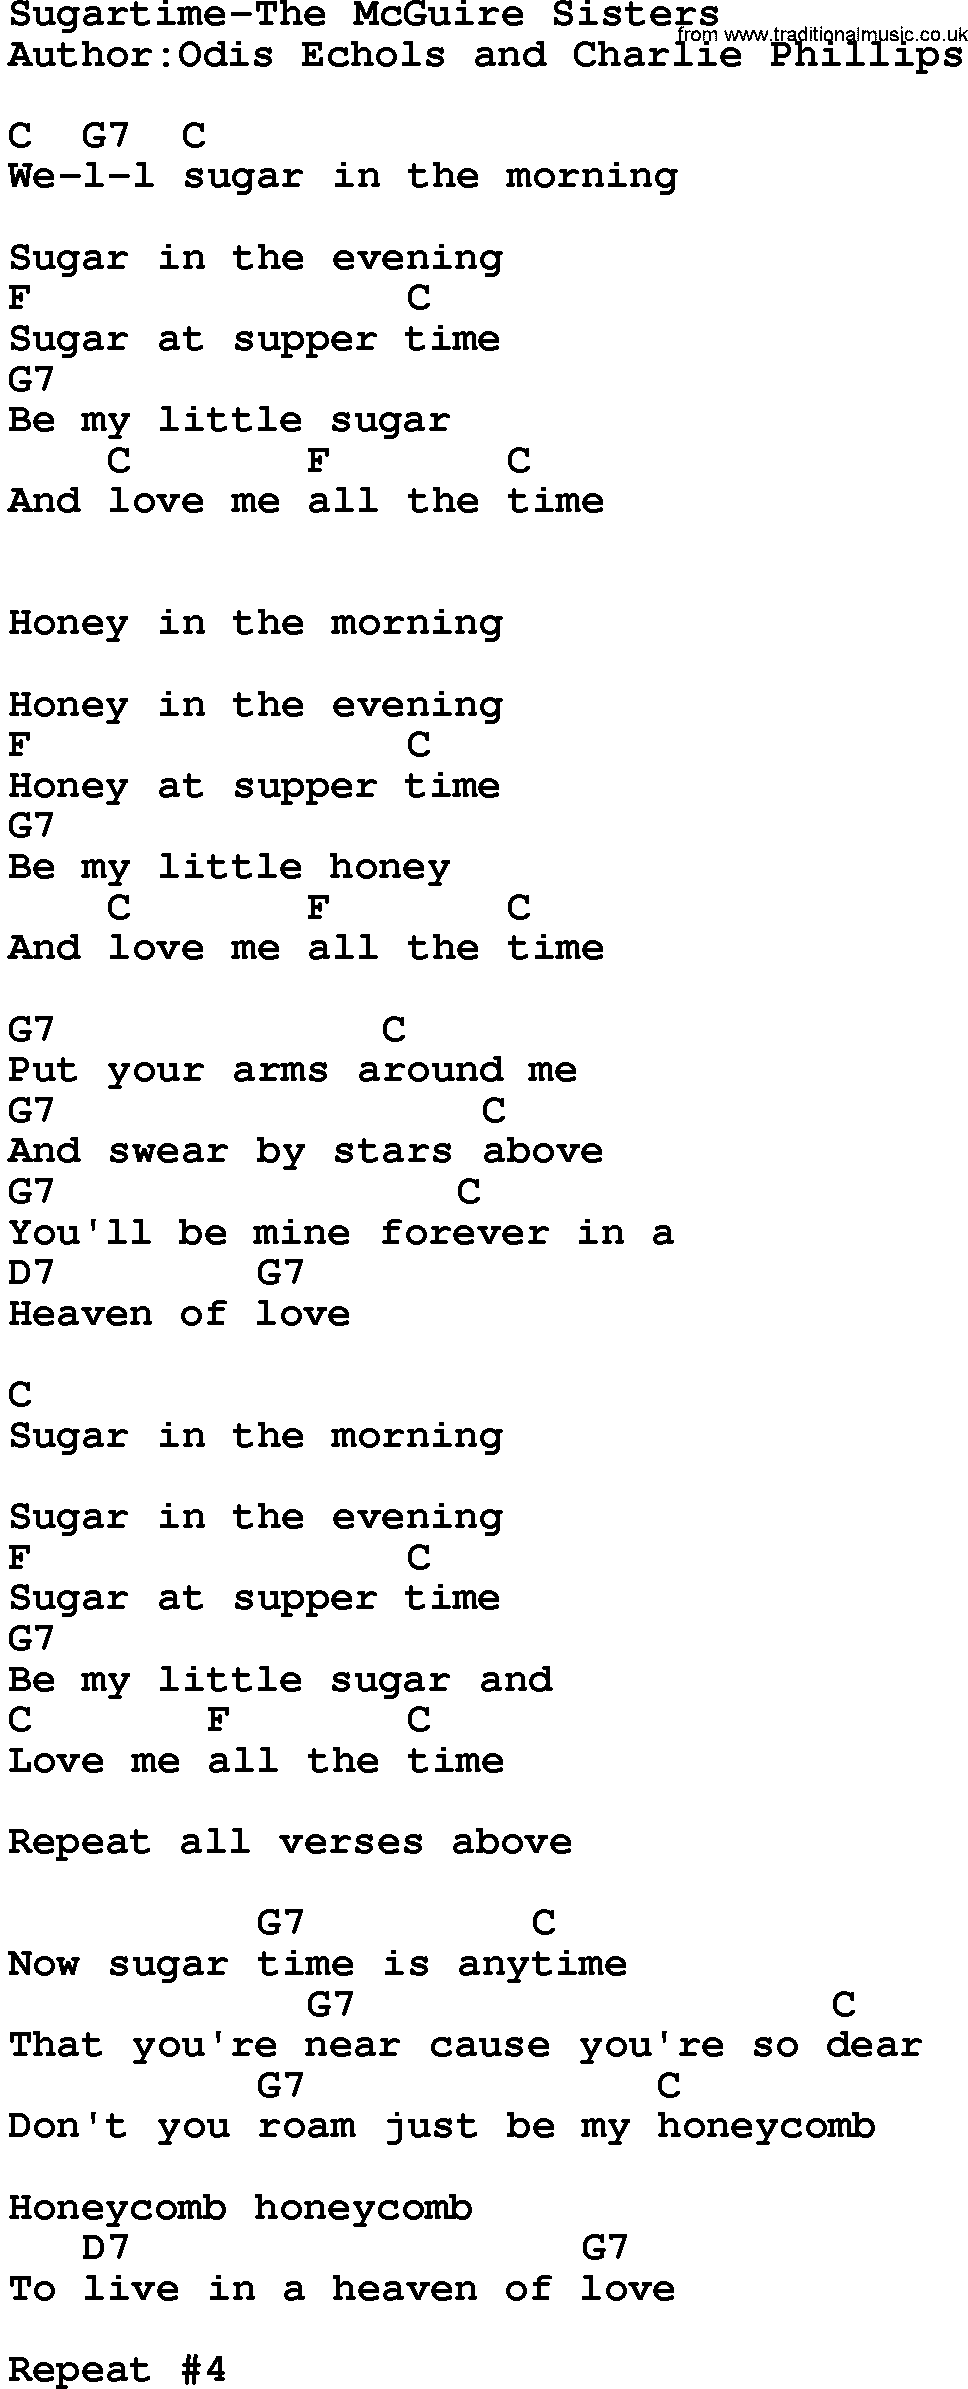 Country music song: Sugartime-The Mcguire Sisters lyrics and chords